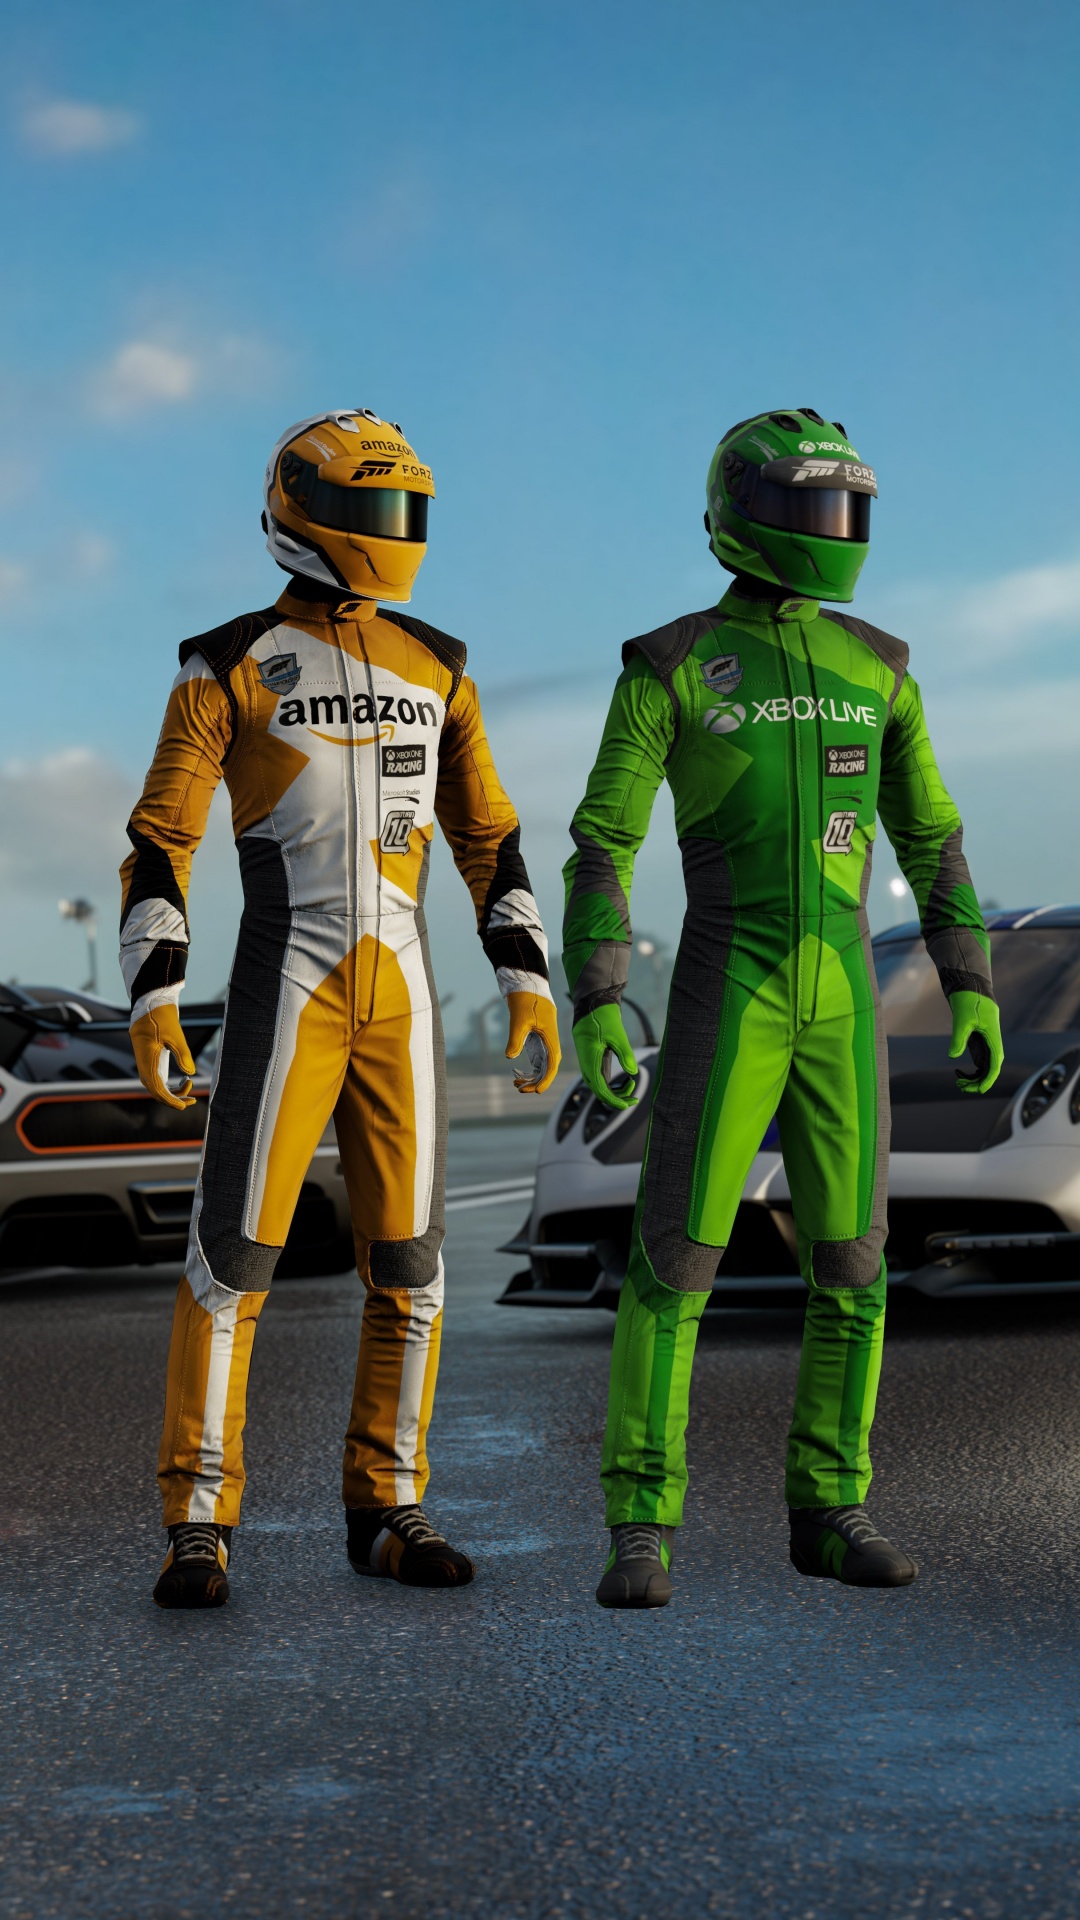 2 Men in Green and Yellow Helmet and Helmet Standing Beside White Sports Car During Daytime. Wallpaper in 1080x1920 Resolution